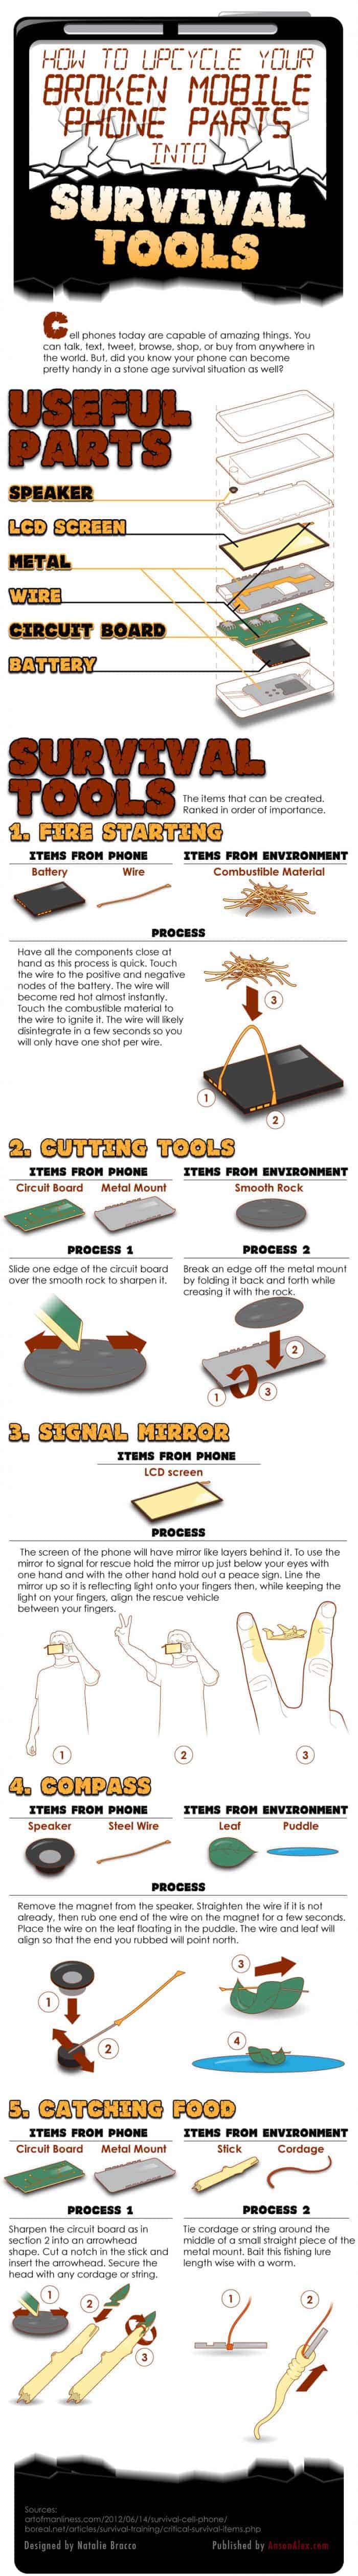 Turning Cell Phones Into Survival Tools Infographic